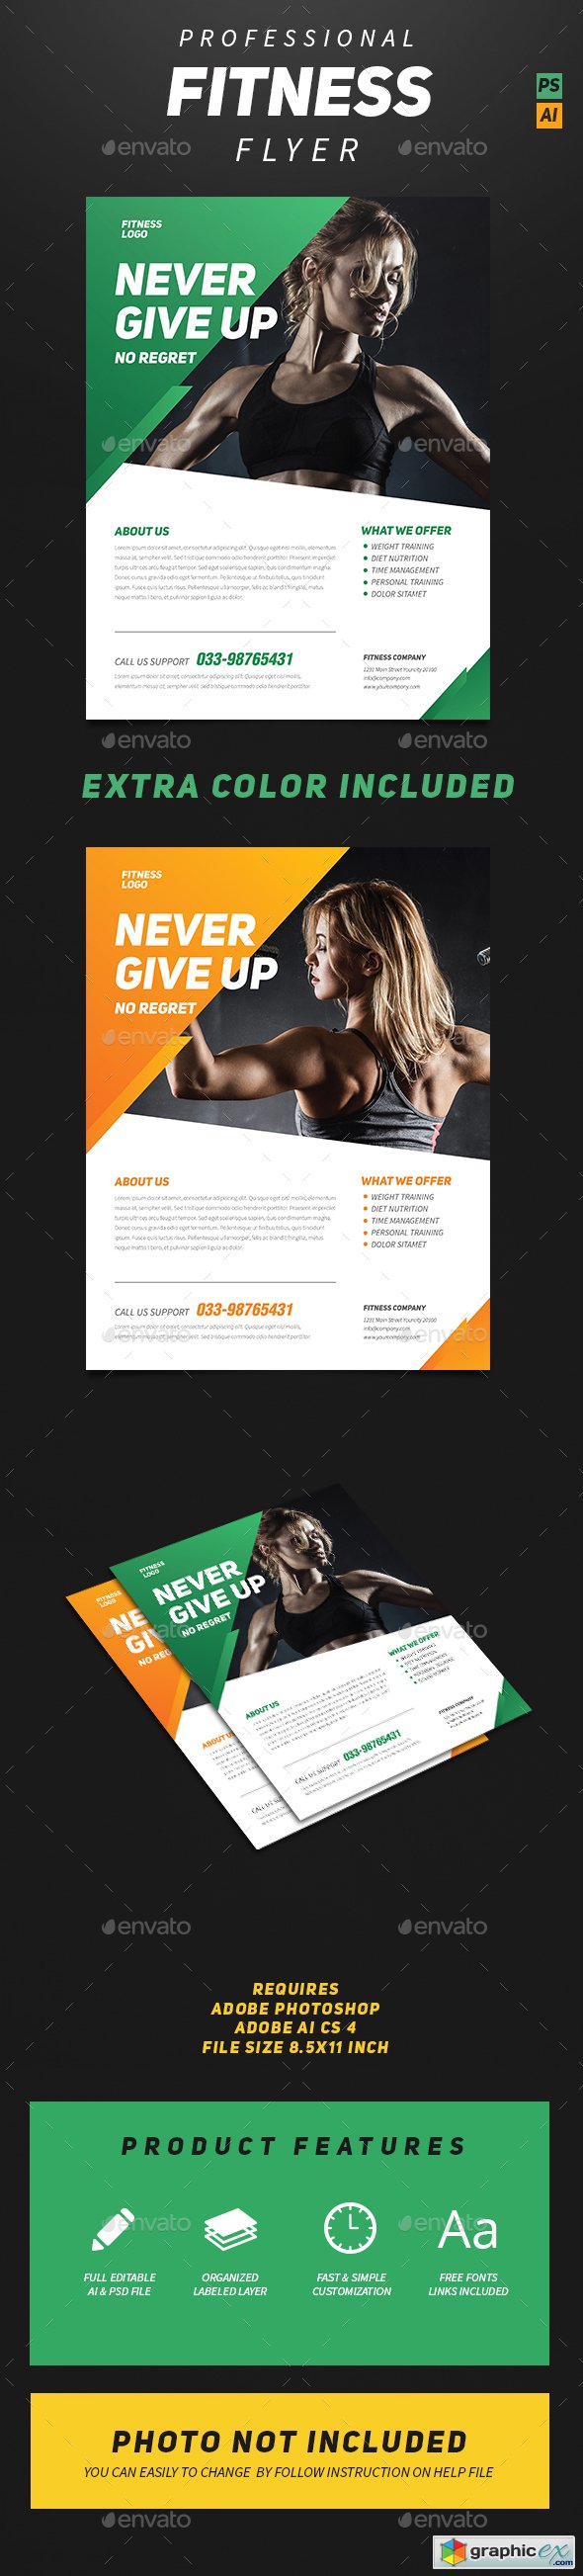 Professional Fitness Flyer 14059698